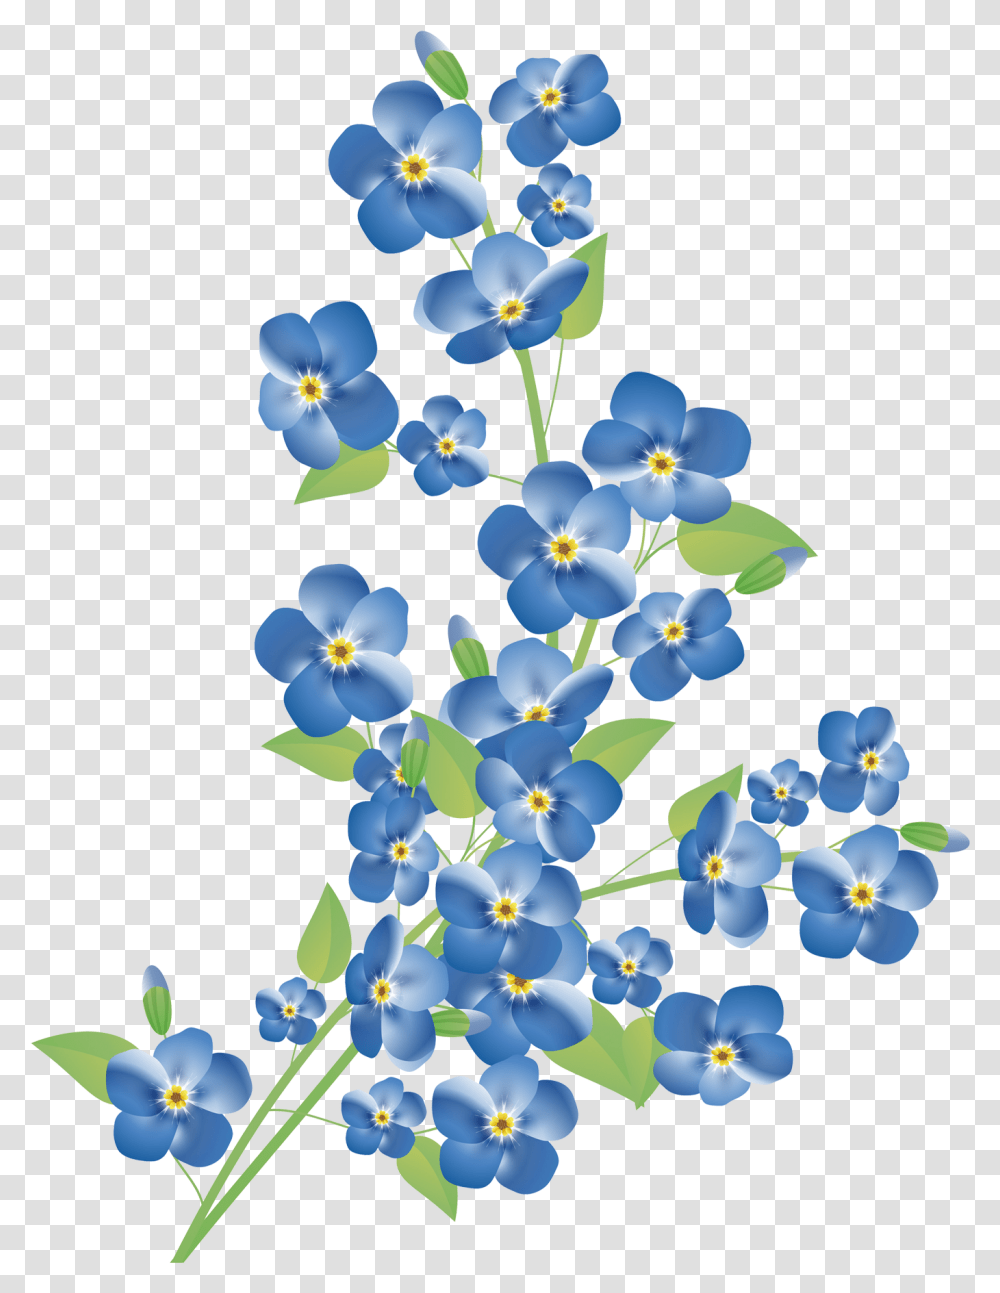 Download Blue Flower Grasses Photography Scorpion Royalty Forget Me Not Flower, Plant, Blossom, Pansy, Iris Transparent Png